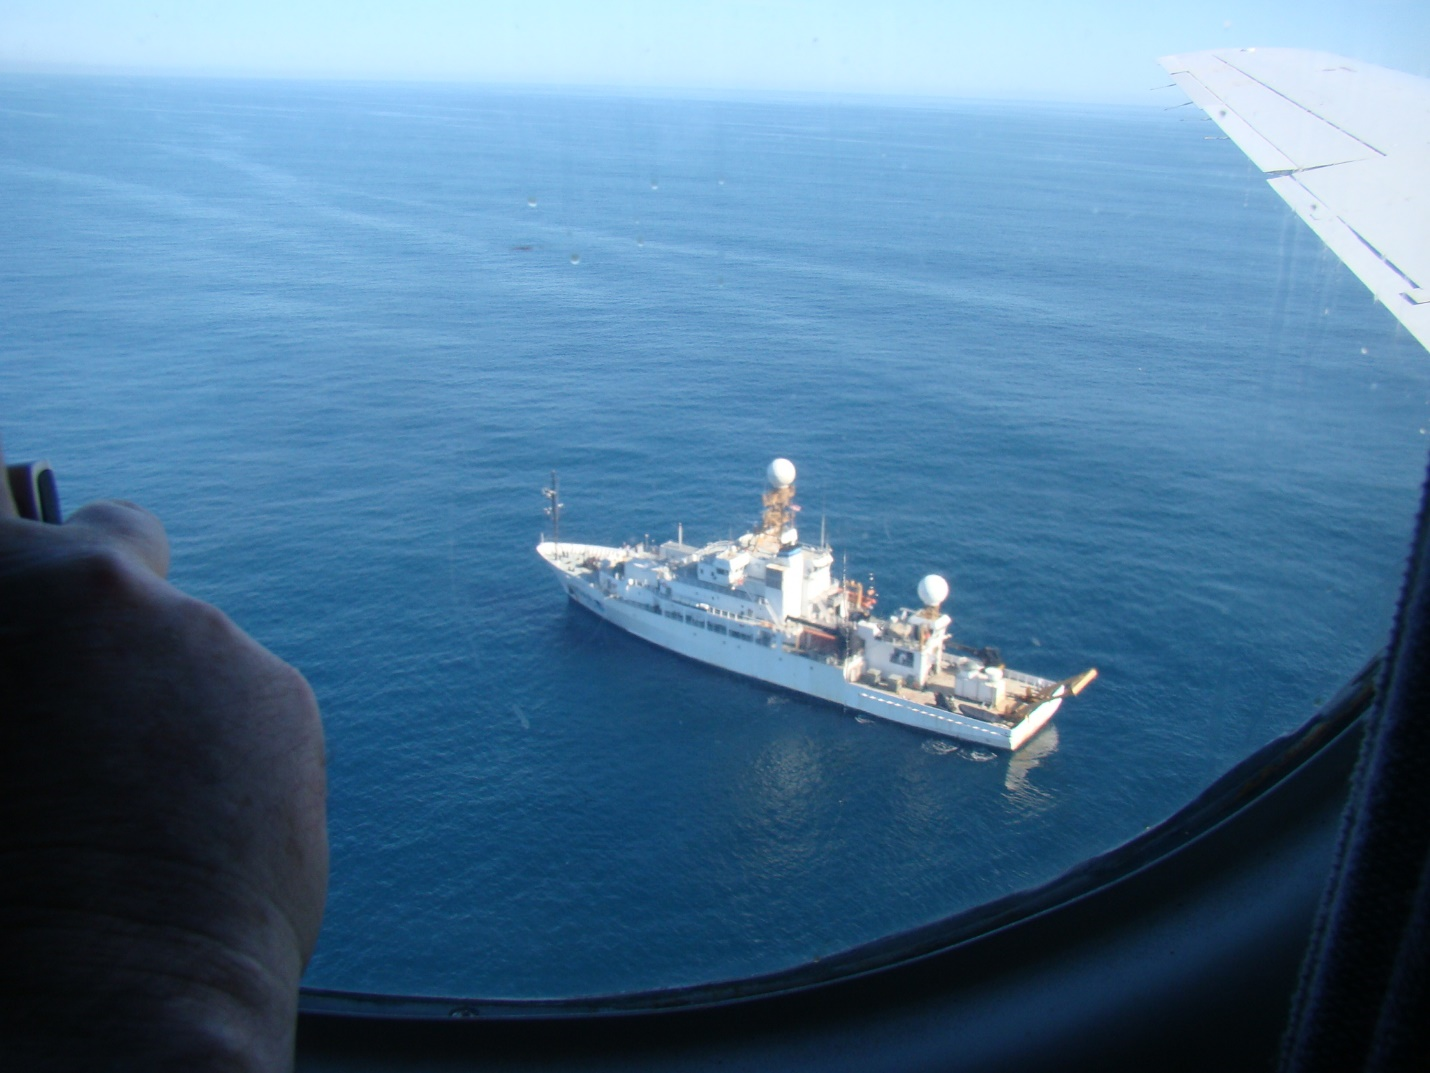 In January 2015, Springston took this picture of the National Oceanic and Atmospheric Administration’s research ship Ronald H. Brown at work off the coast of California during the ARM Cloud Aerosol Precipitation Experiment field campaign. Photo is courtesy of Springston.